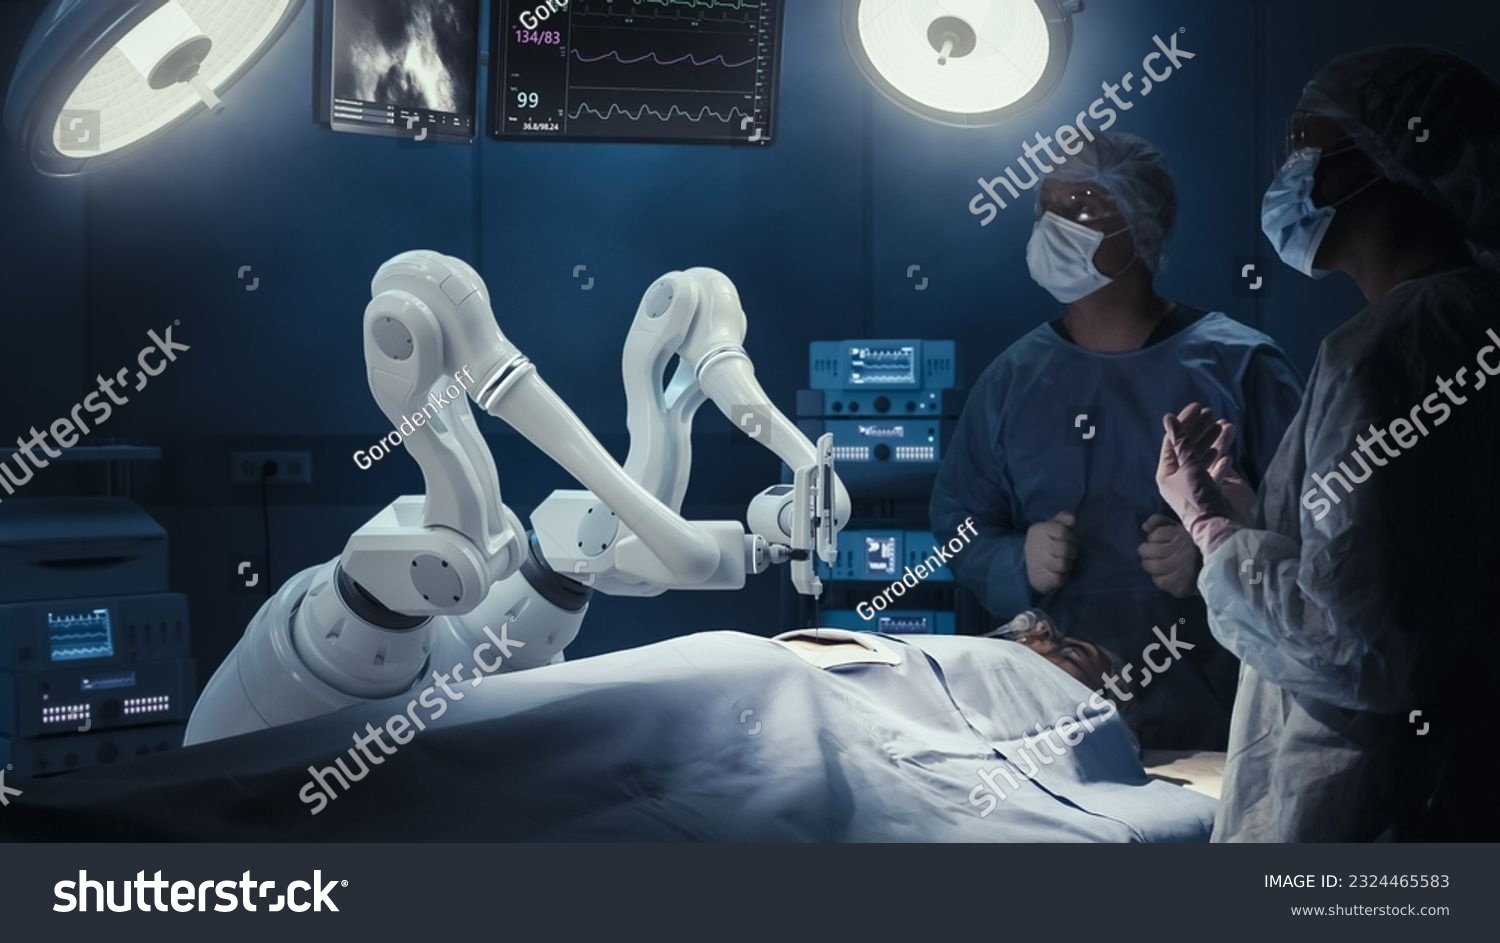 Two Surgeons Observing High-Precision Programmable Automated Robot Arms Operating Patient In High-Tech Hospital. Robotic Limbs Performing Complicated Nanosurgery, Doctors Looking At Vitals On Monitor. #2324465583